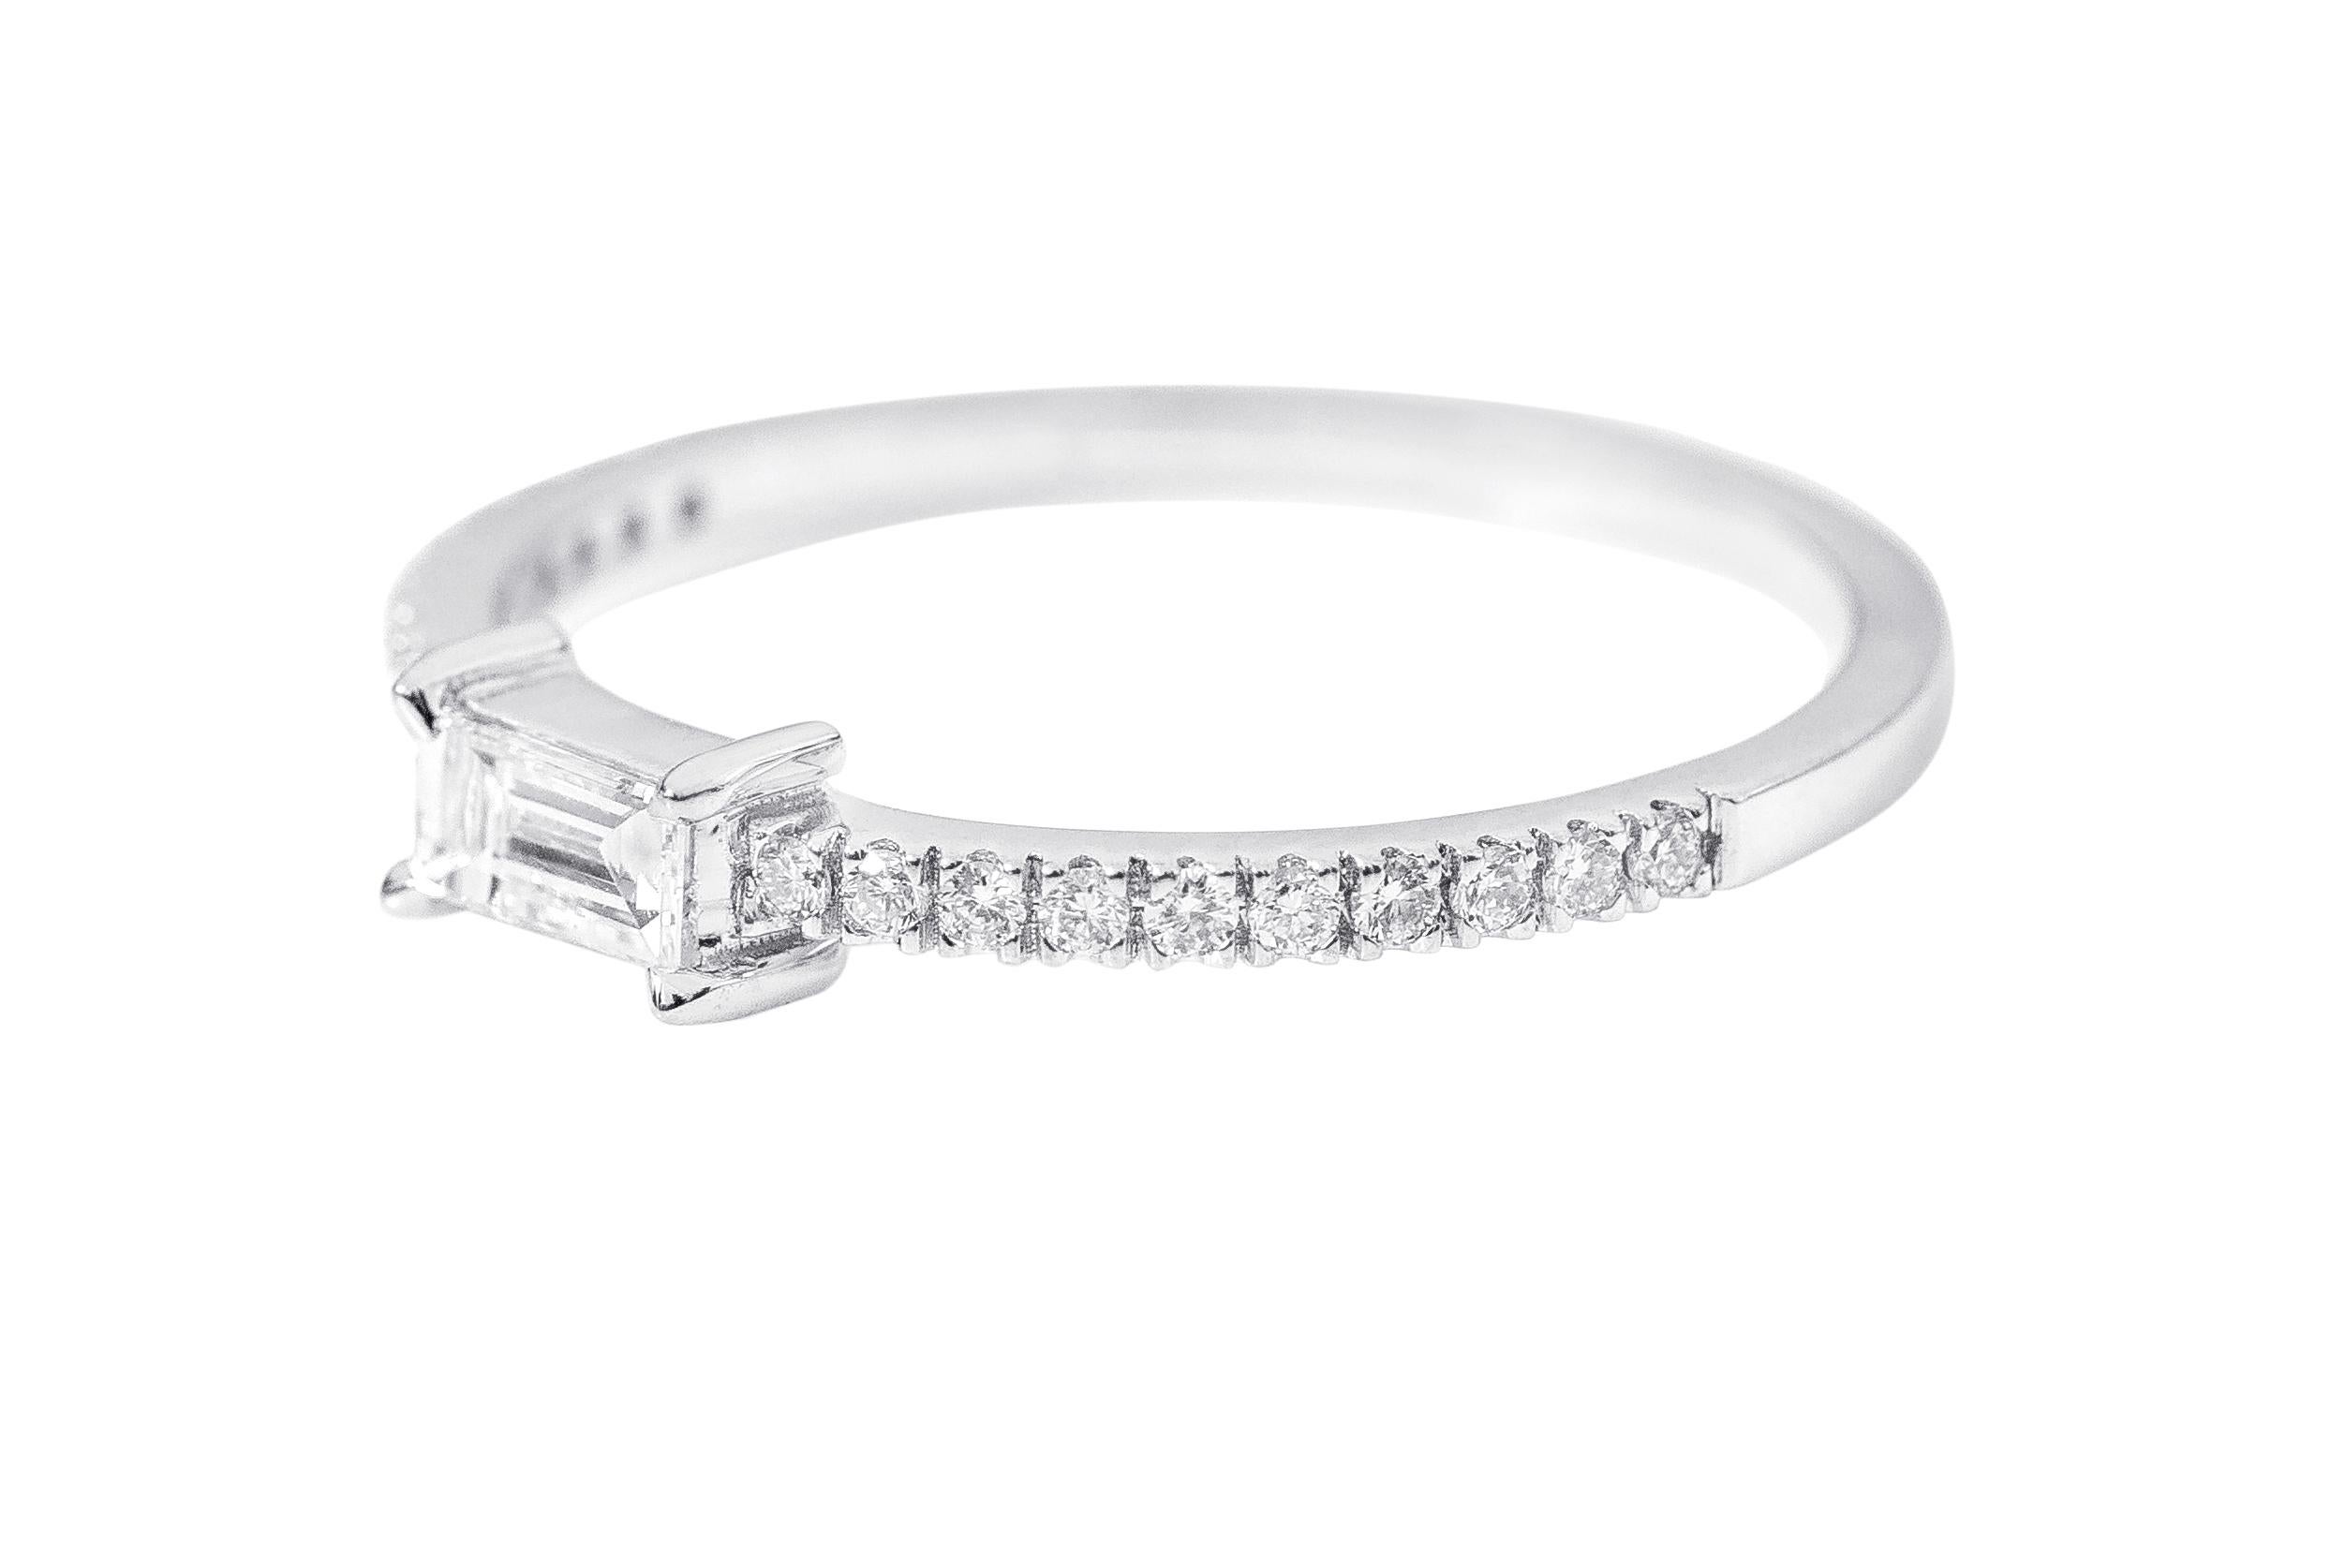 18 Karat White Gold Diamond Solitaire Eternity Band Ring

This exquisite diamond ring is scintillating. The solitaire baguette cut diamond in eagle prong box setting in rose gold is perfect. The thin band of half pave-set round diamonds and